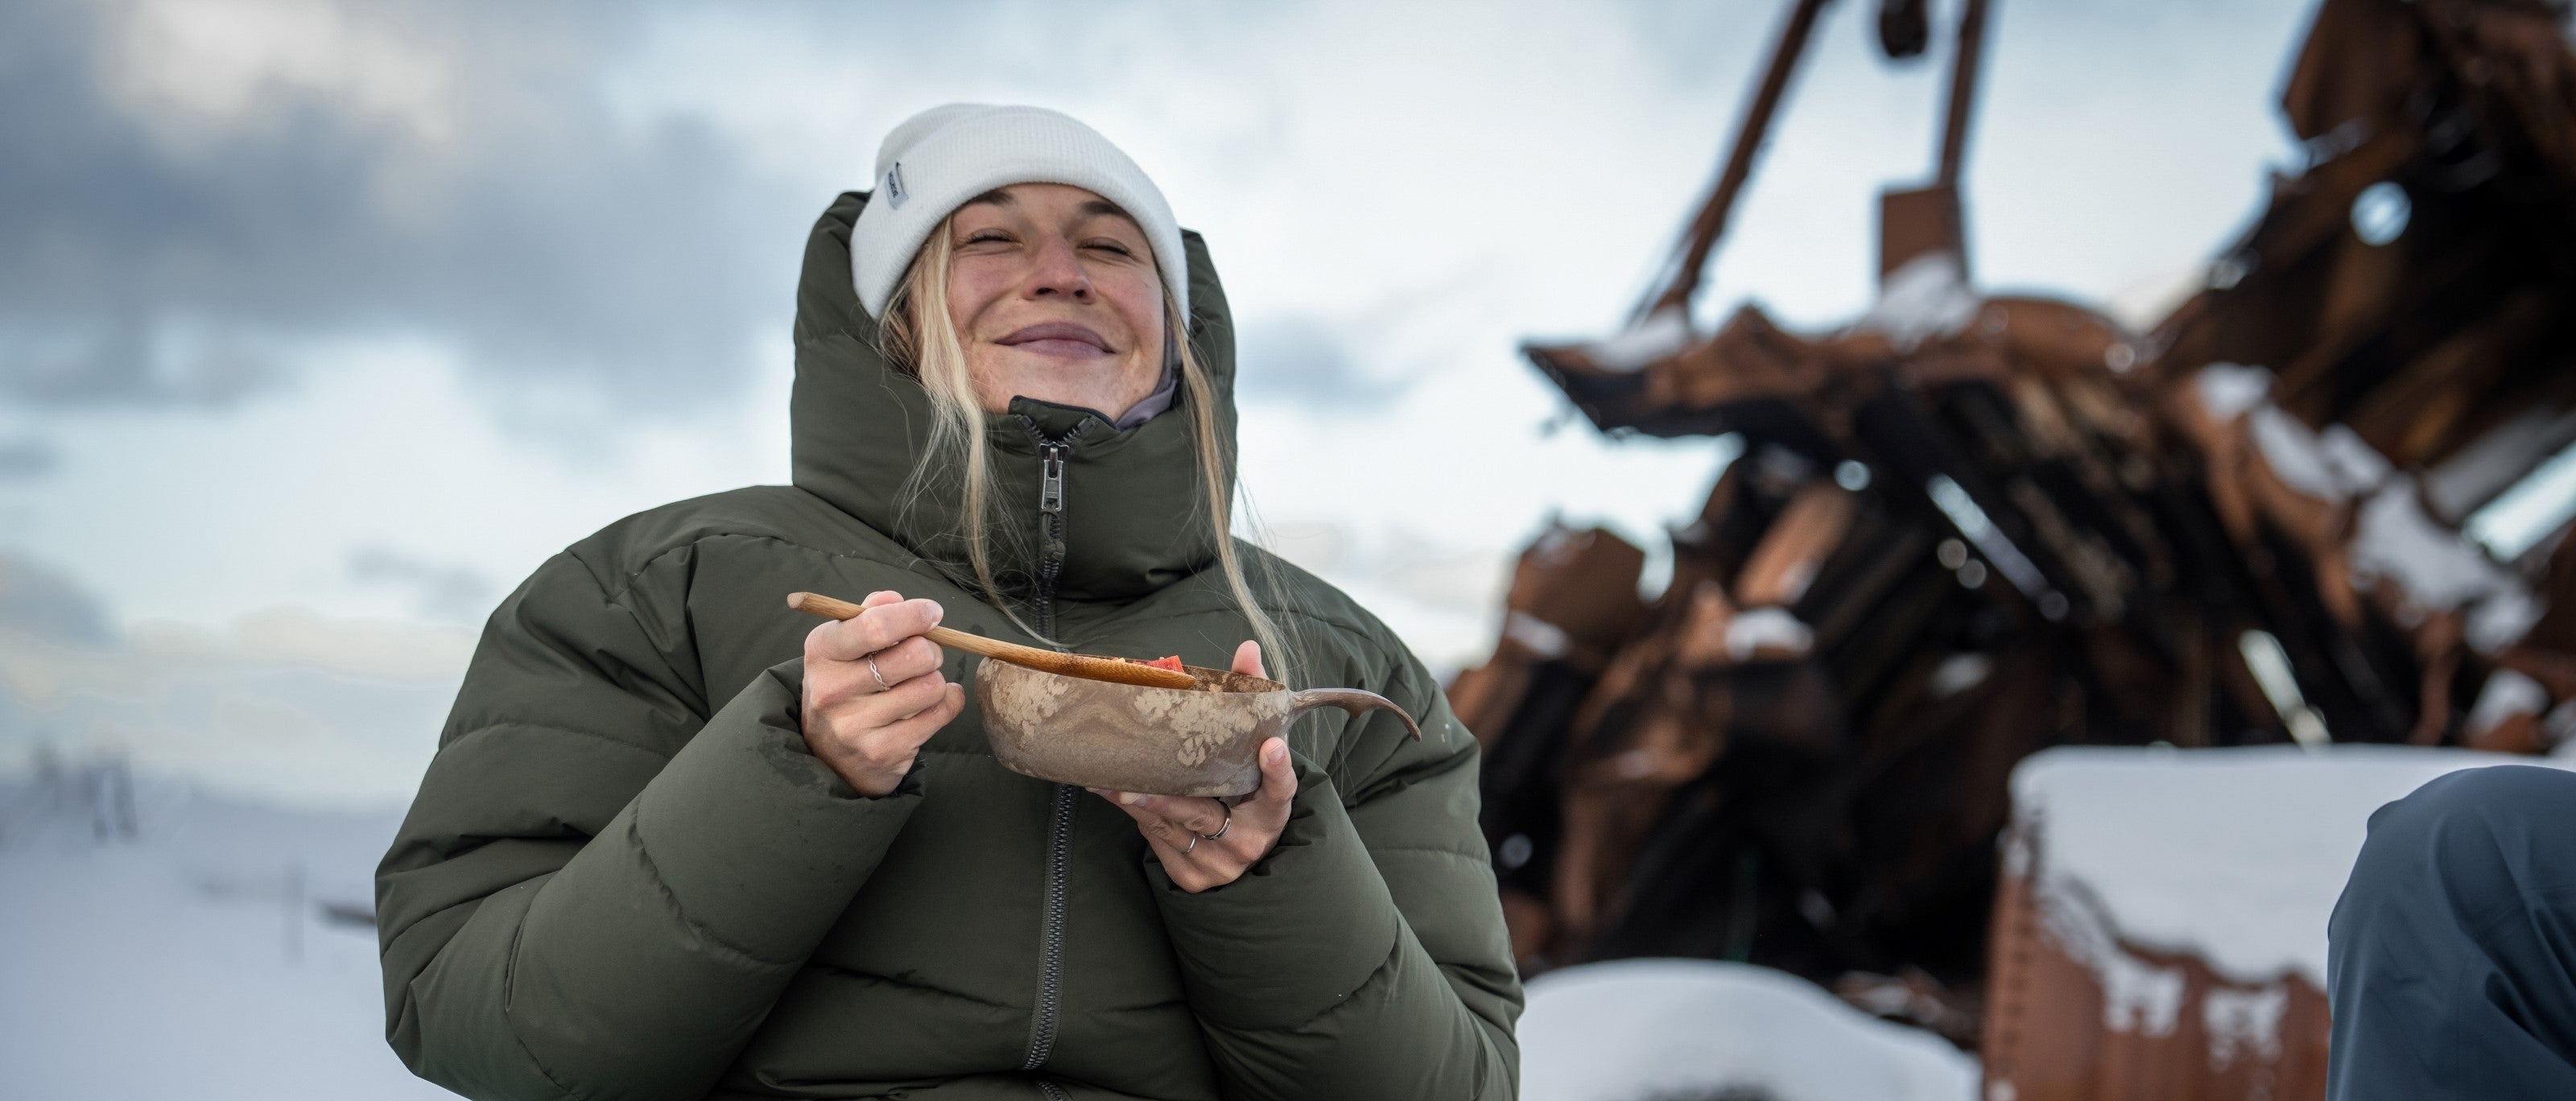 Storms and Silence: Wild Food in Norway